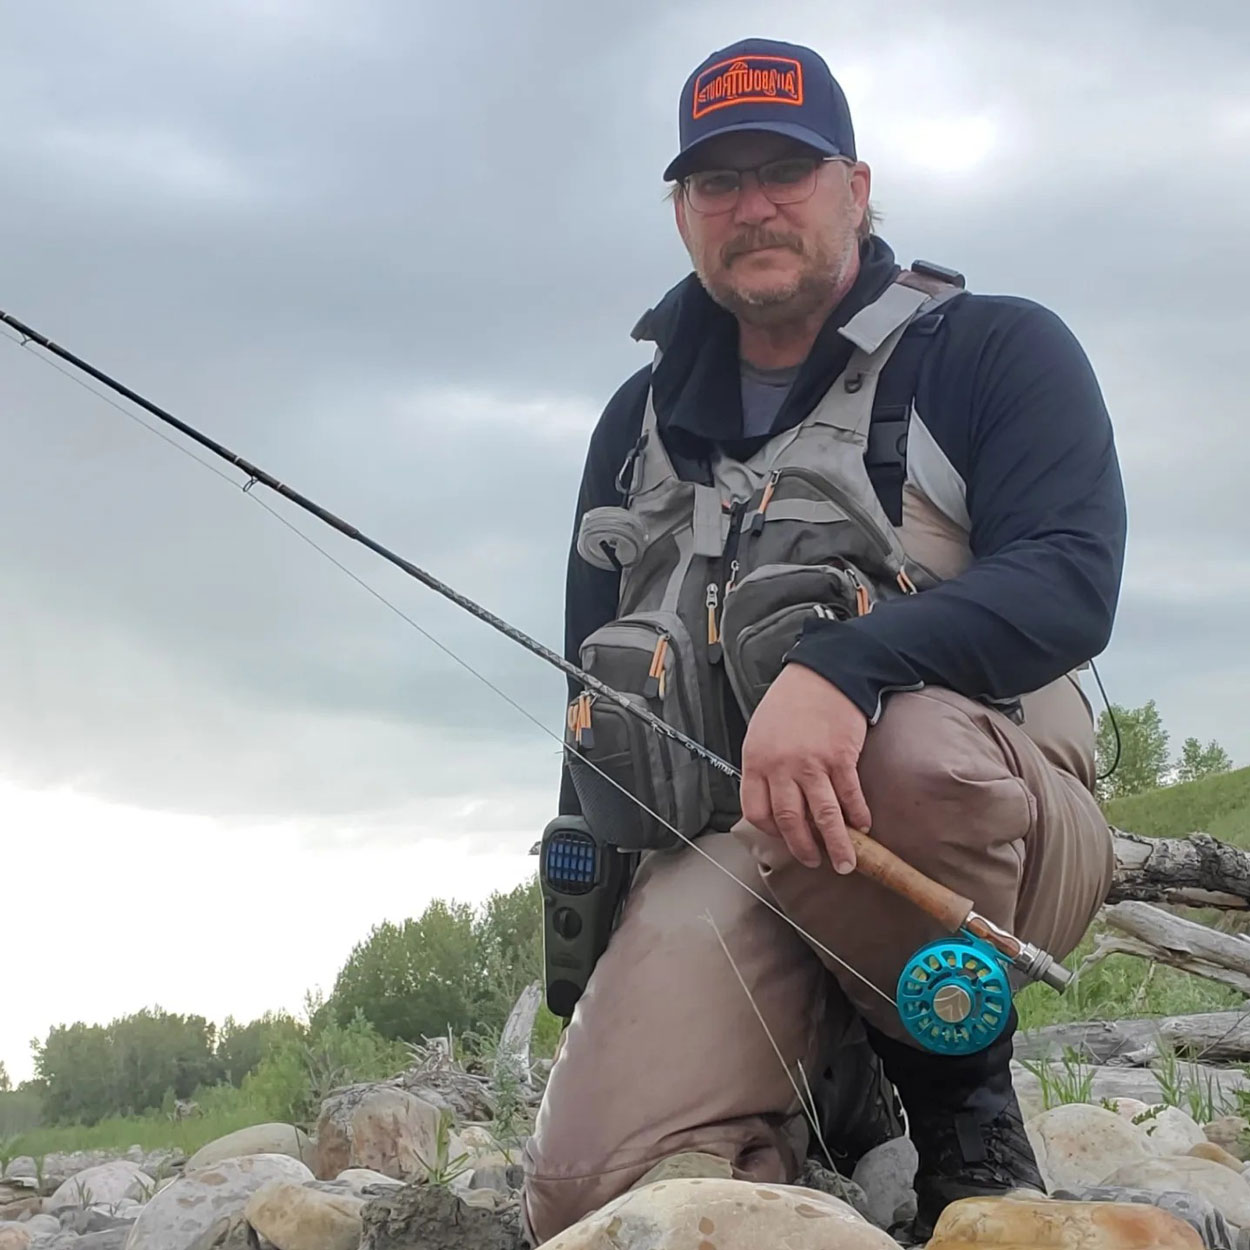 Season 6 Thursday Night Live Fly Tying - FLY FISHING BOW RIVER OUTFITTERS